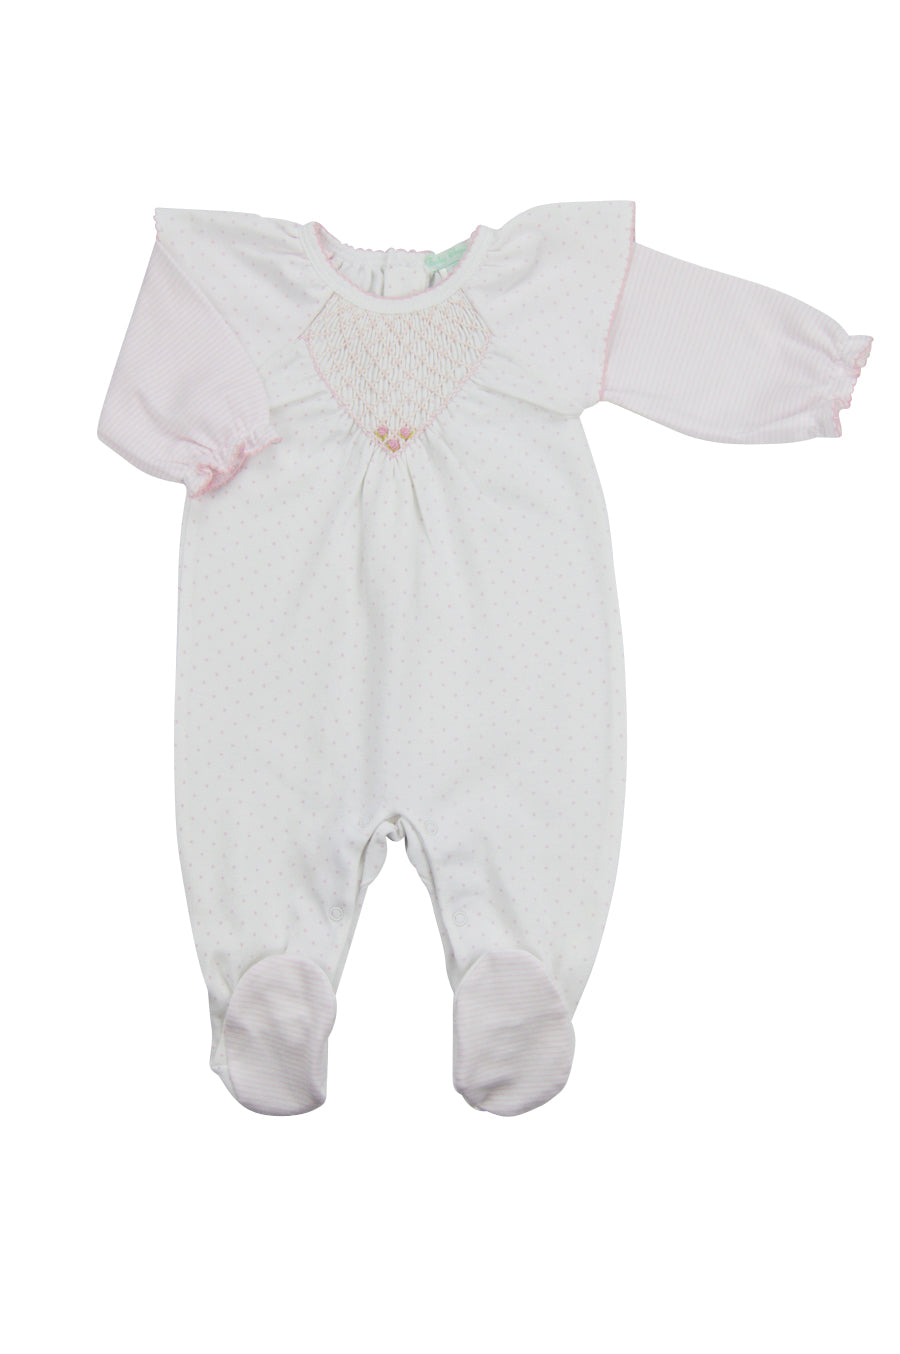 Baby Girl's Polka Dot and Stripe Footie - Little Threads Inc. Children's Clothing